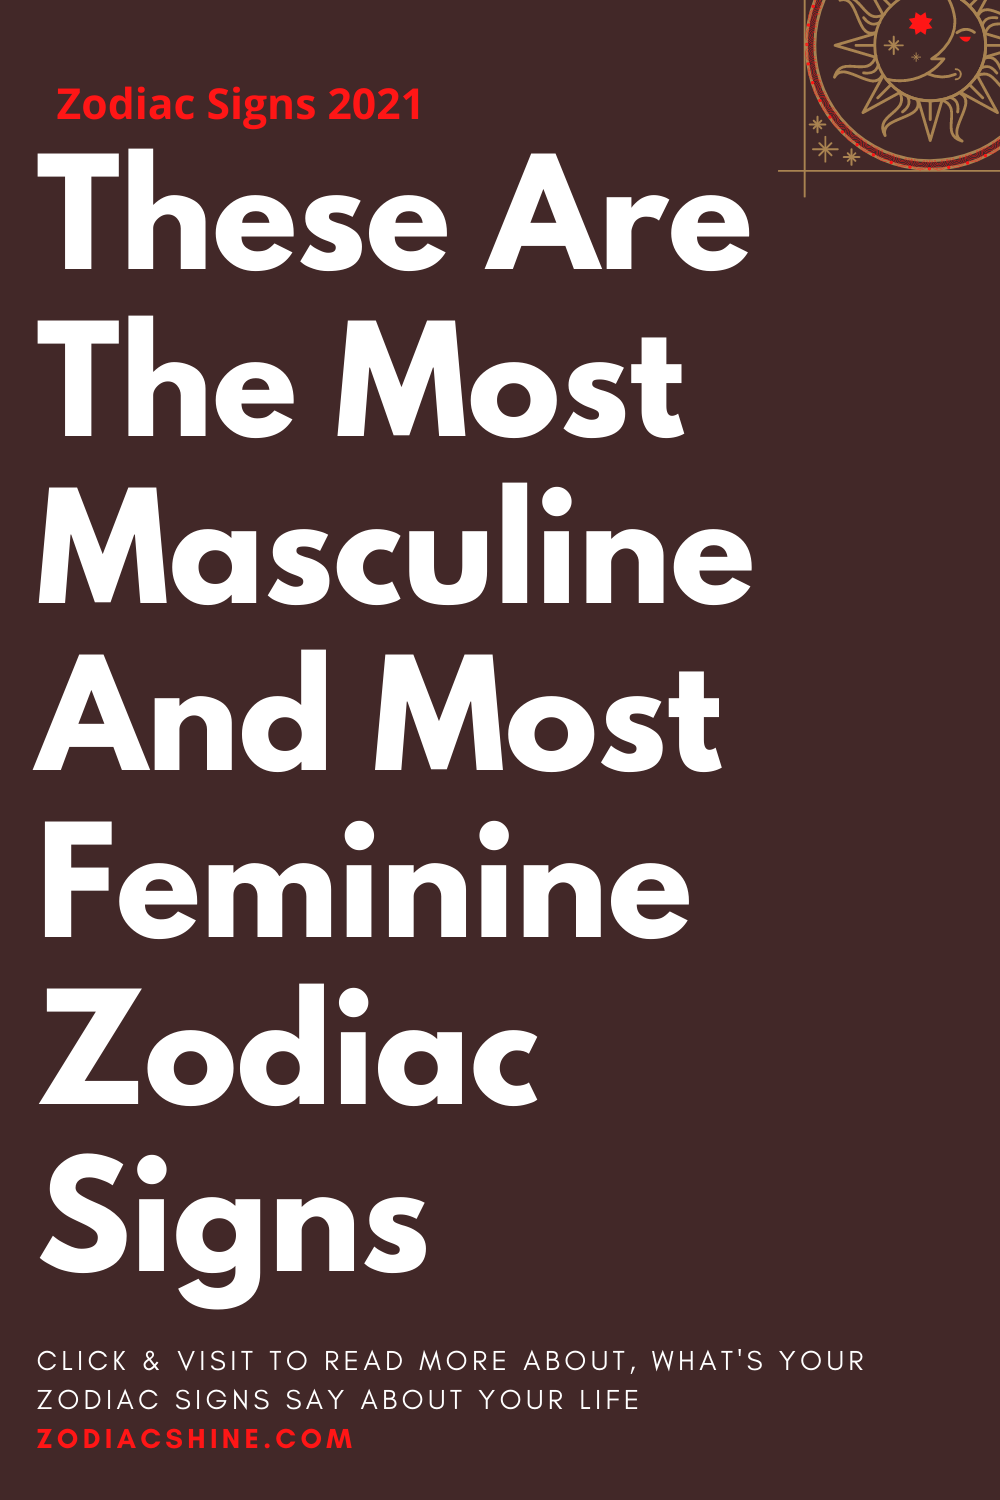 These Are The Most Masculine And Most Feminine Zodiac Signs